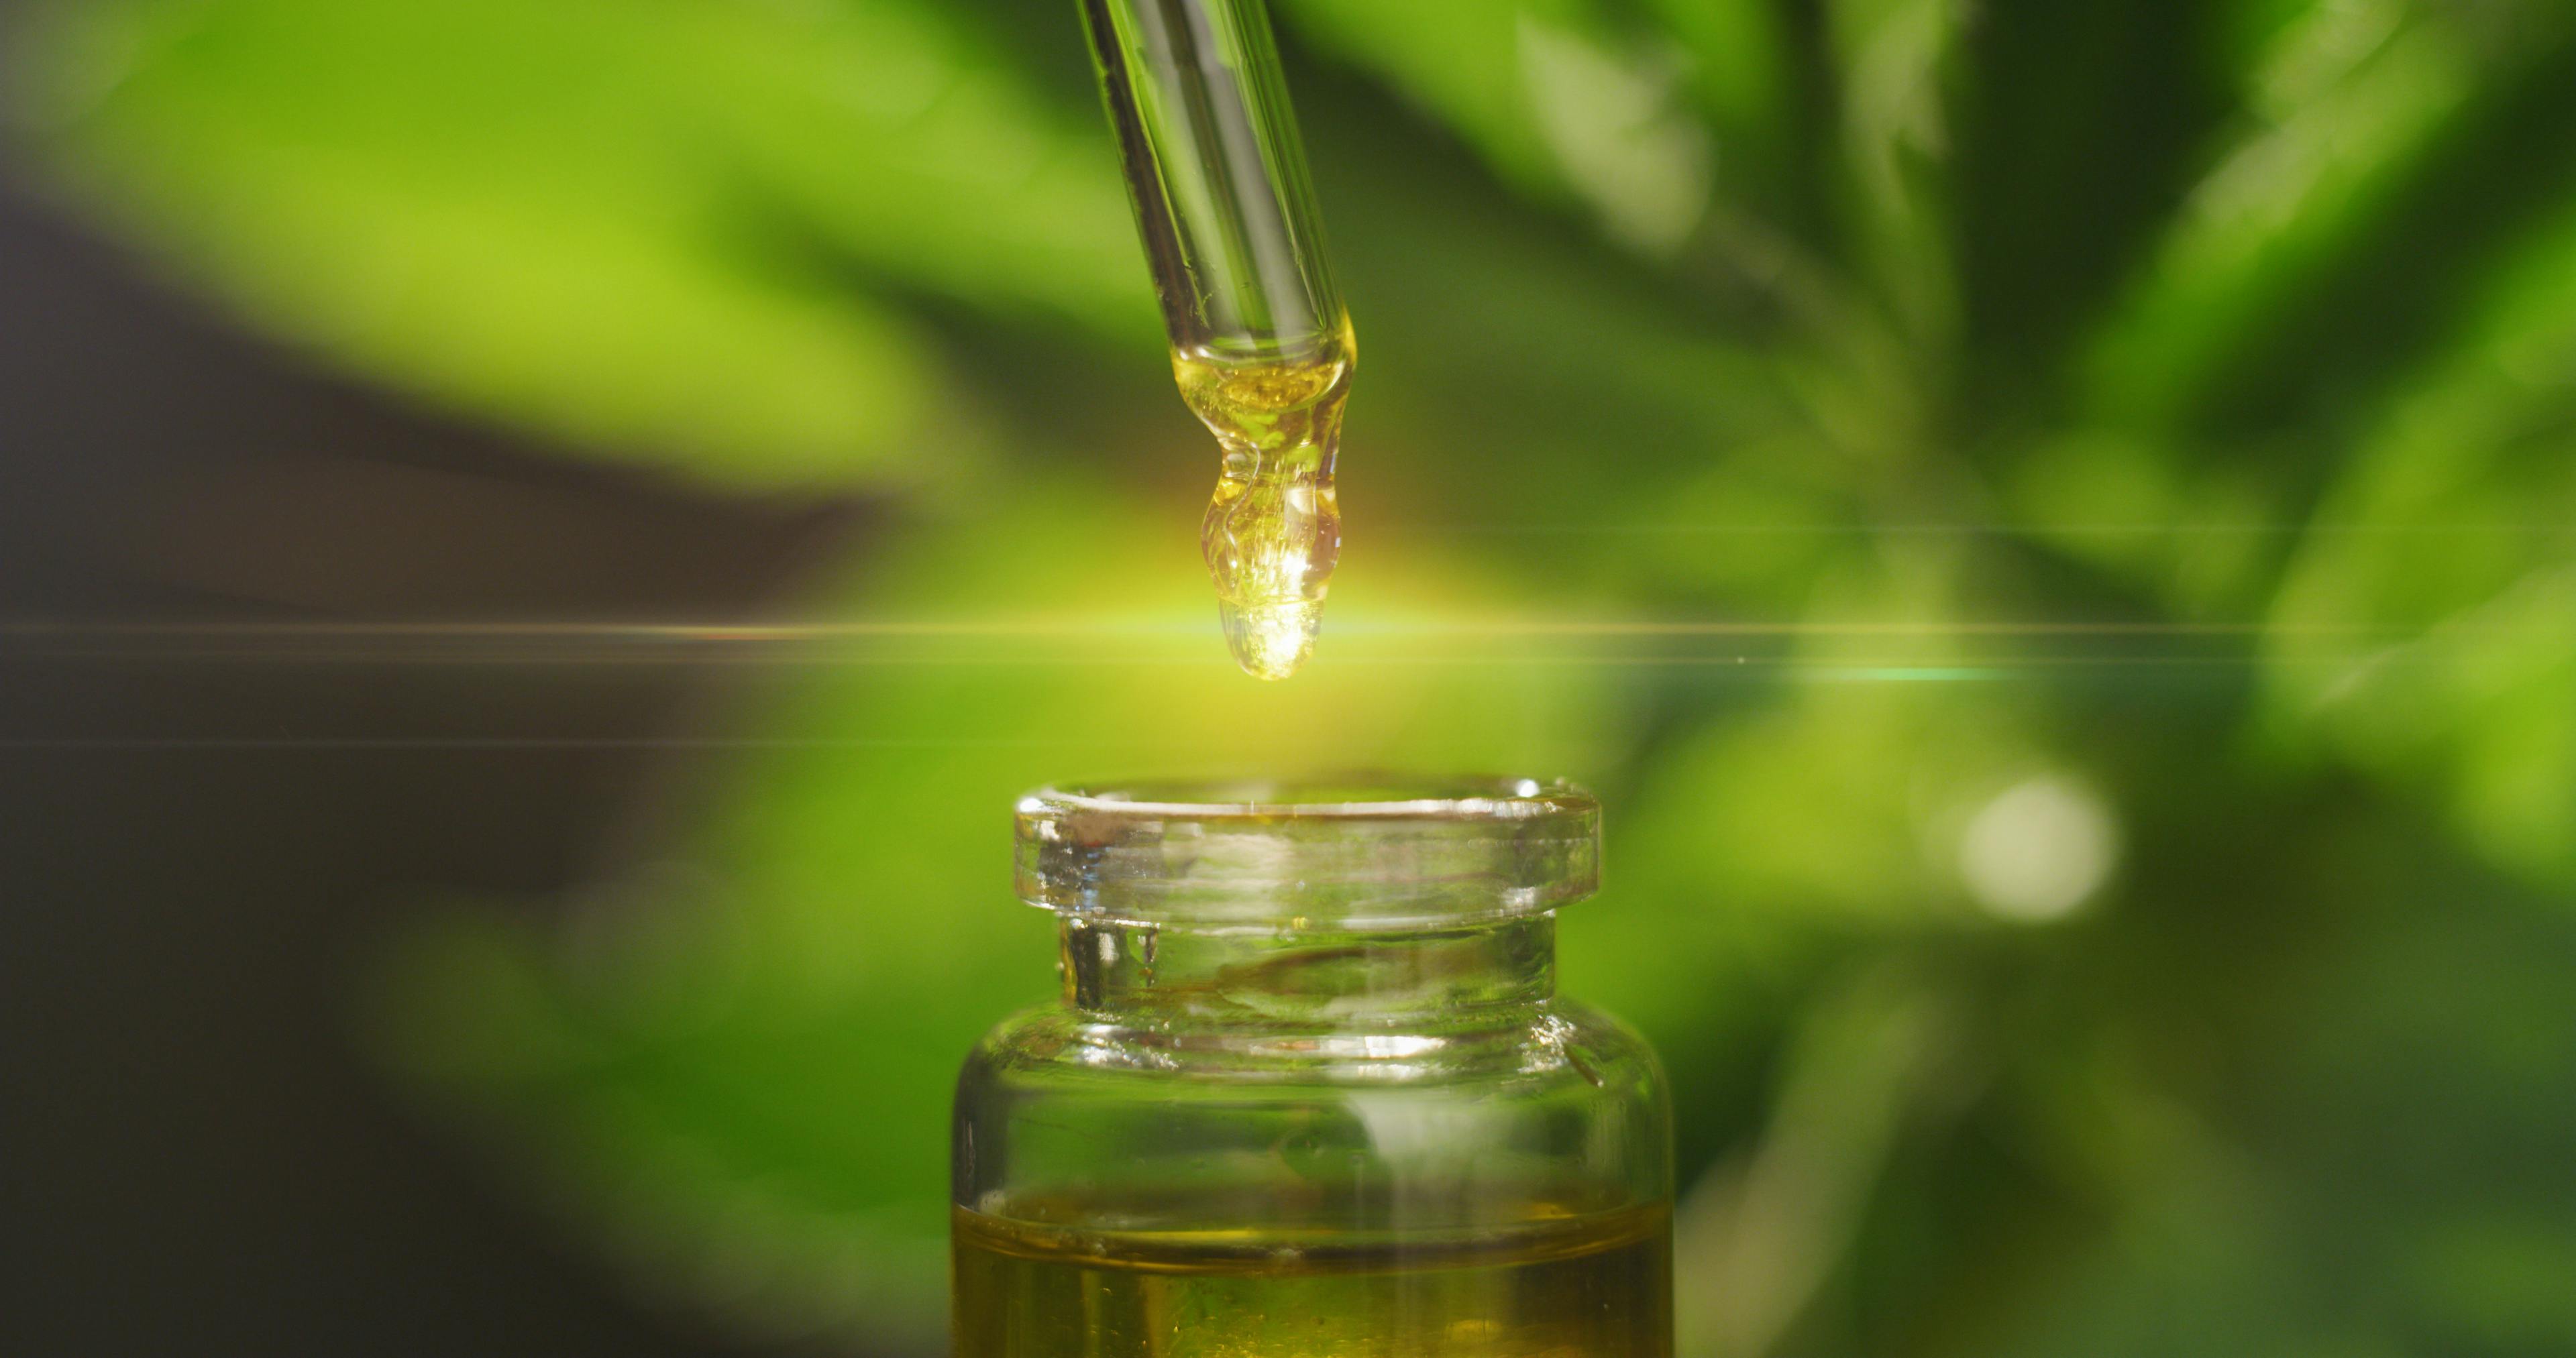 Study Finds Half of CBD-Related Tweets Market Therapeutic Claims 